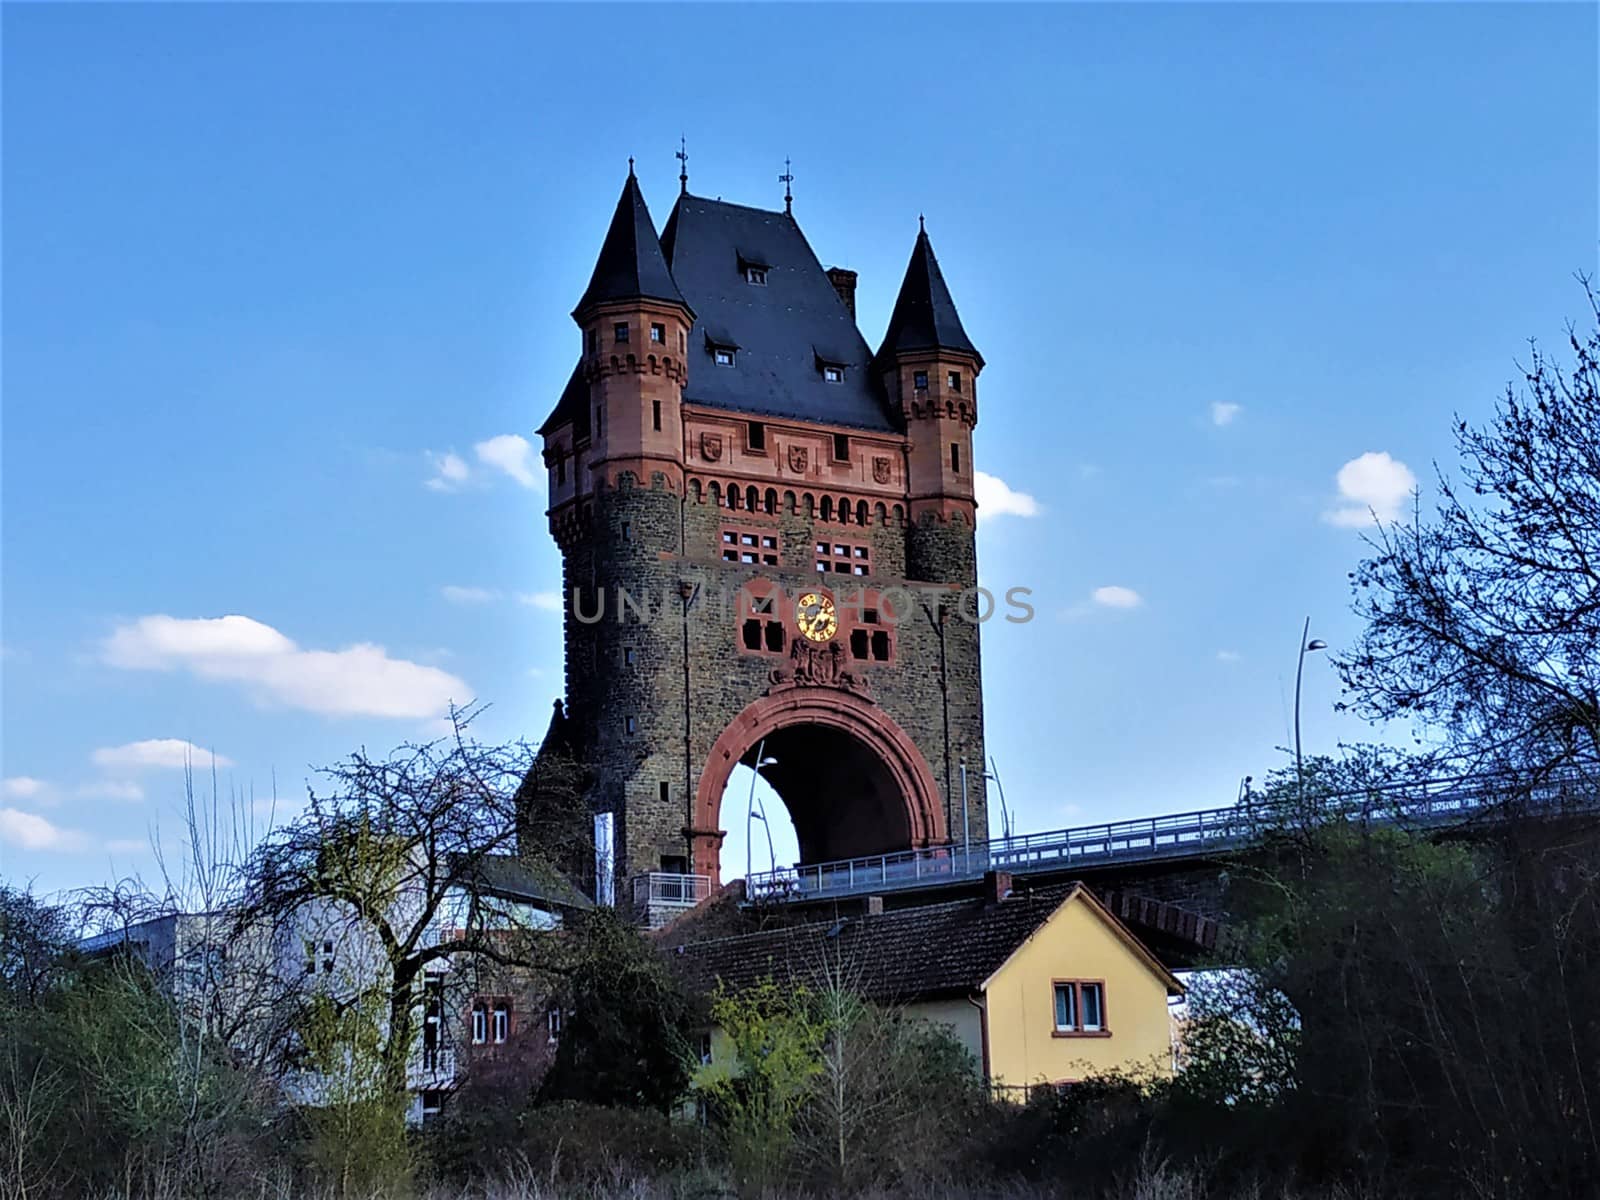 The Nibelung bridge in Worms with famous nibelung tower